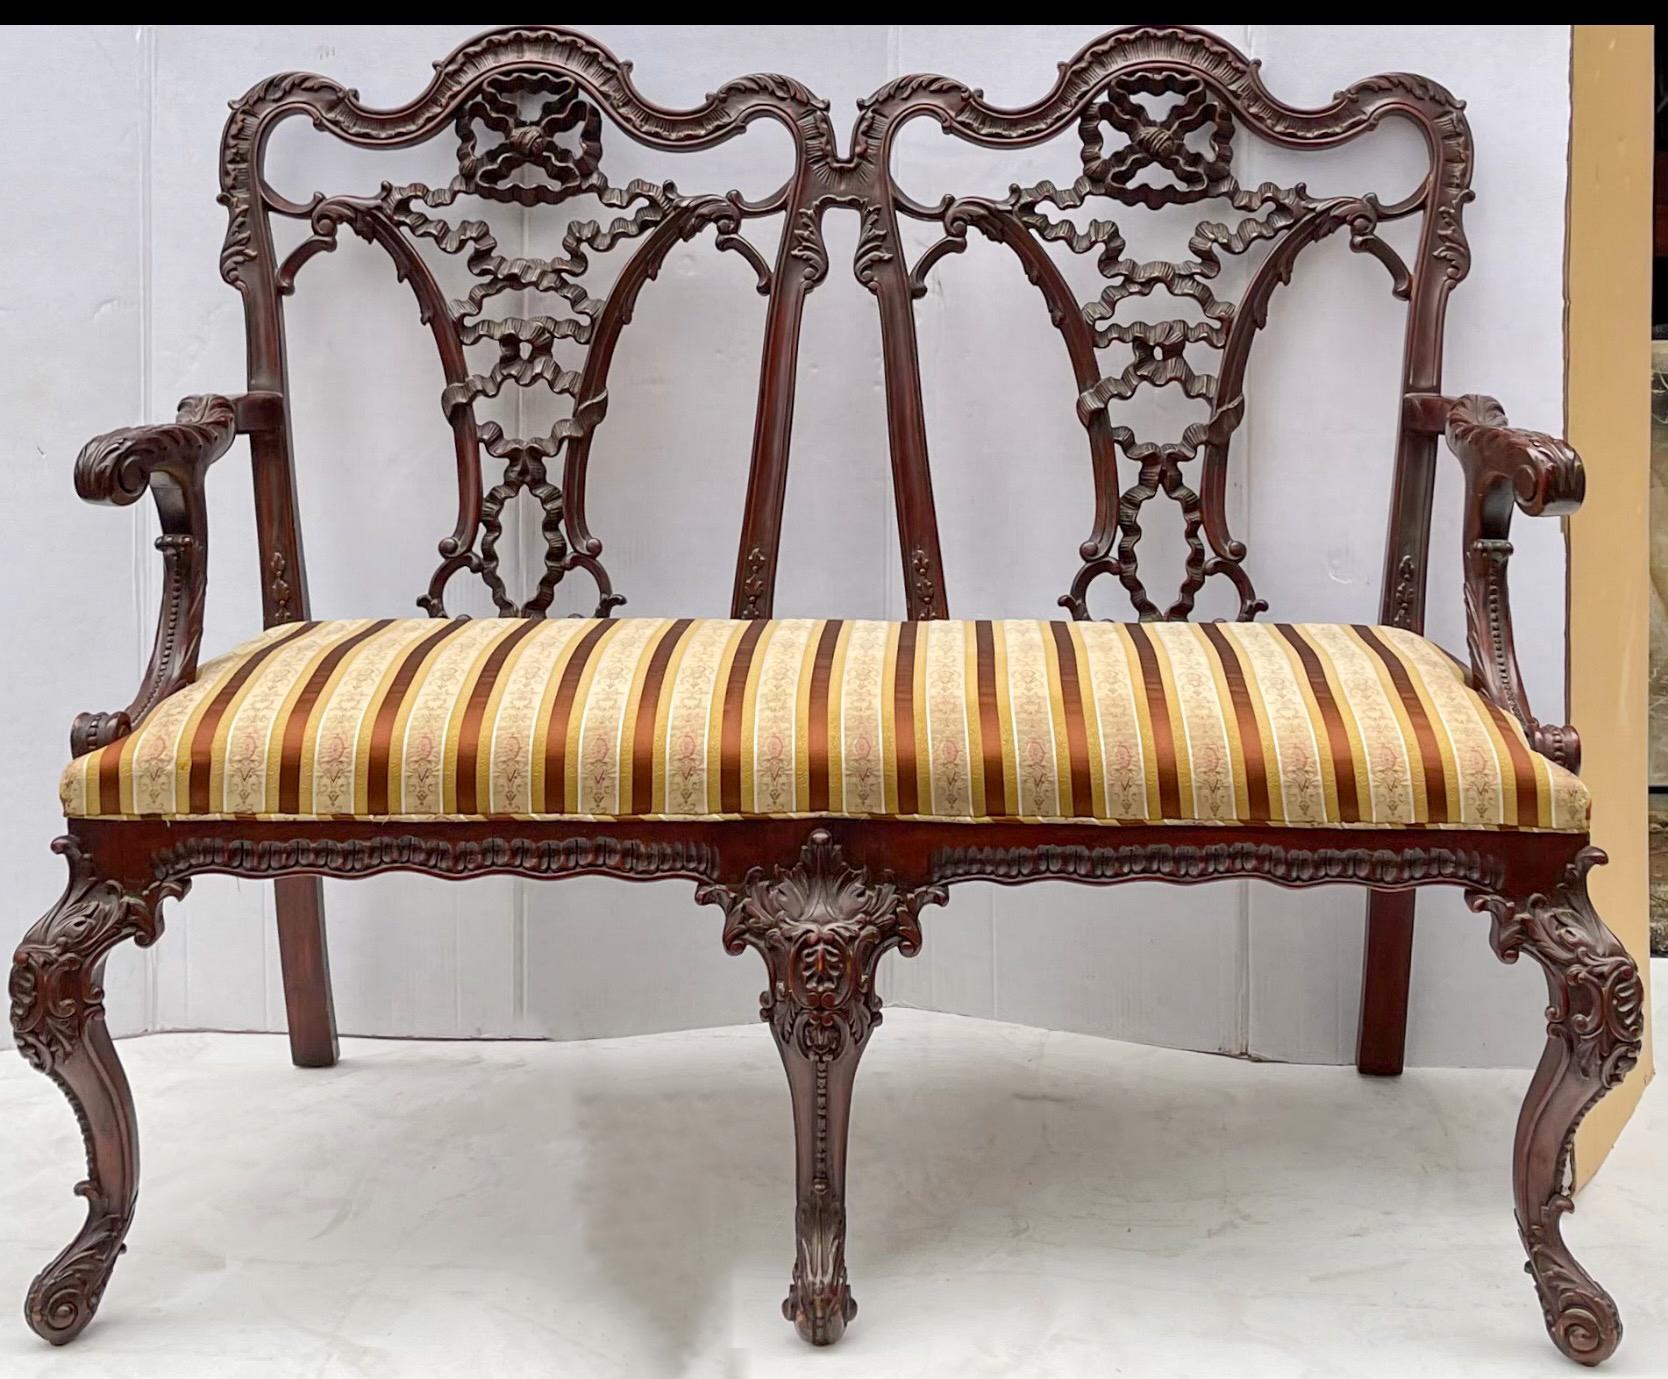 Early 20th-C. English Chinese Chippendale Style Carved Mahogany Settee / Bench  For Sale 3